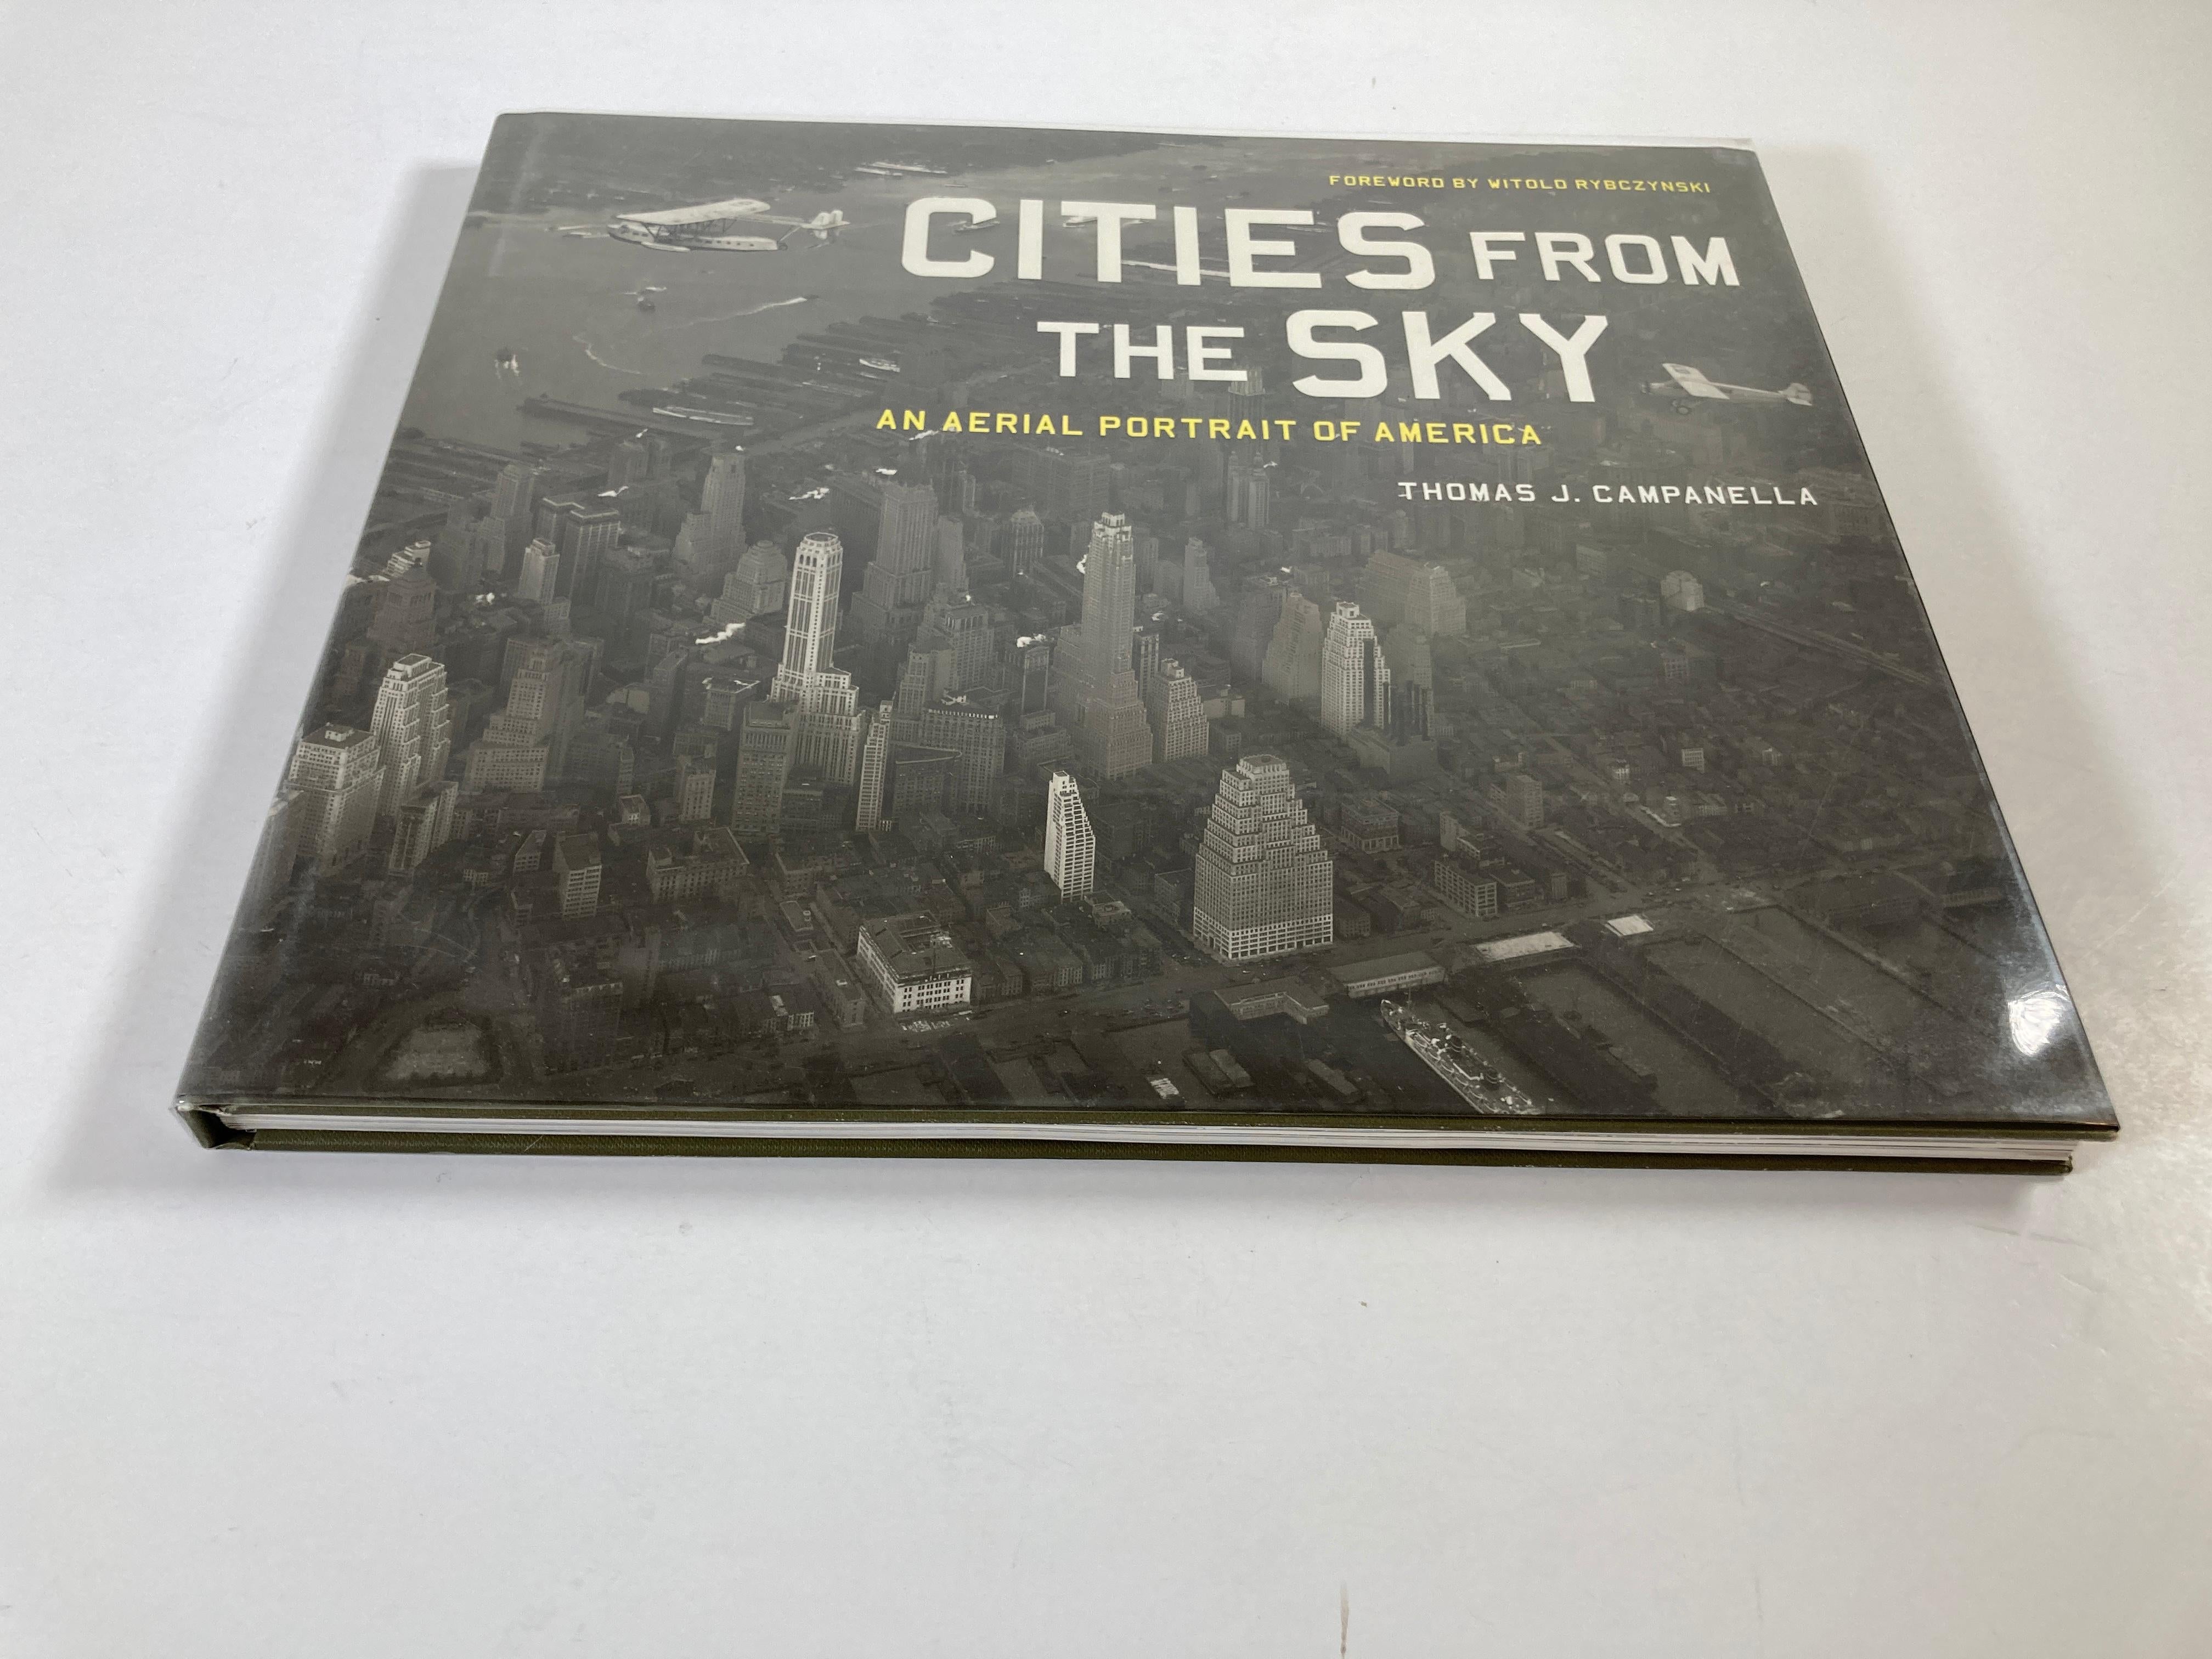 American Cities from the Sky: An Aerial Portrait of America Hardcover Book